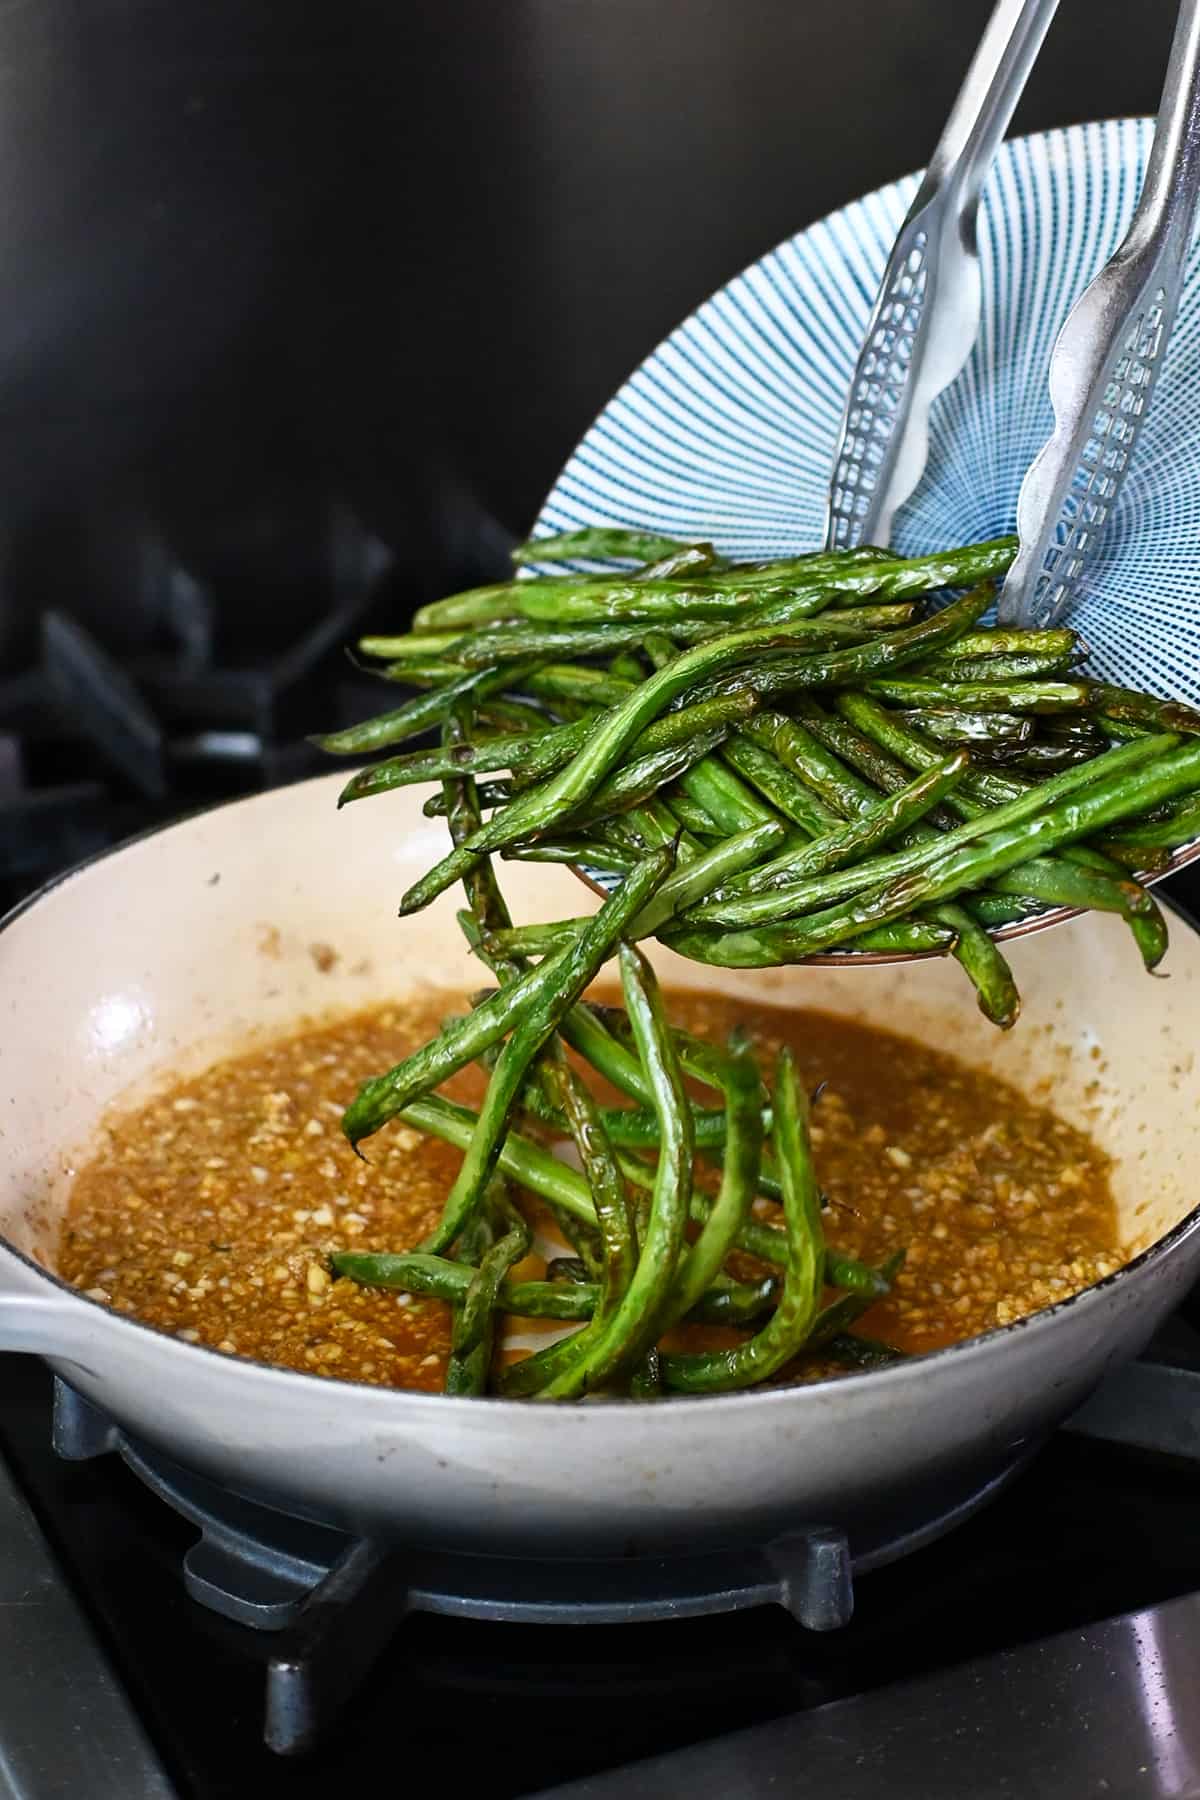 Adding the blistered green beans back into the skillet with the garlic sauce.